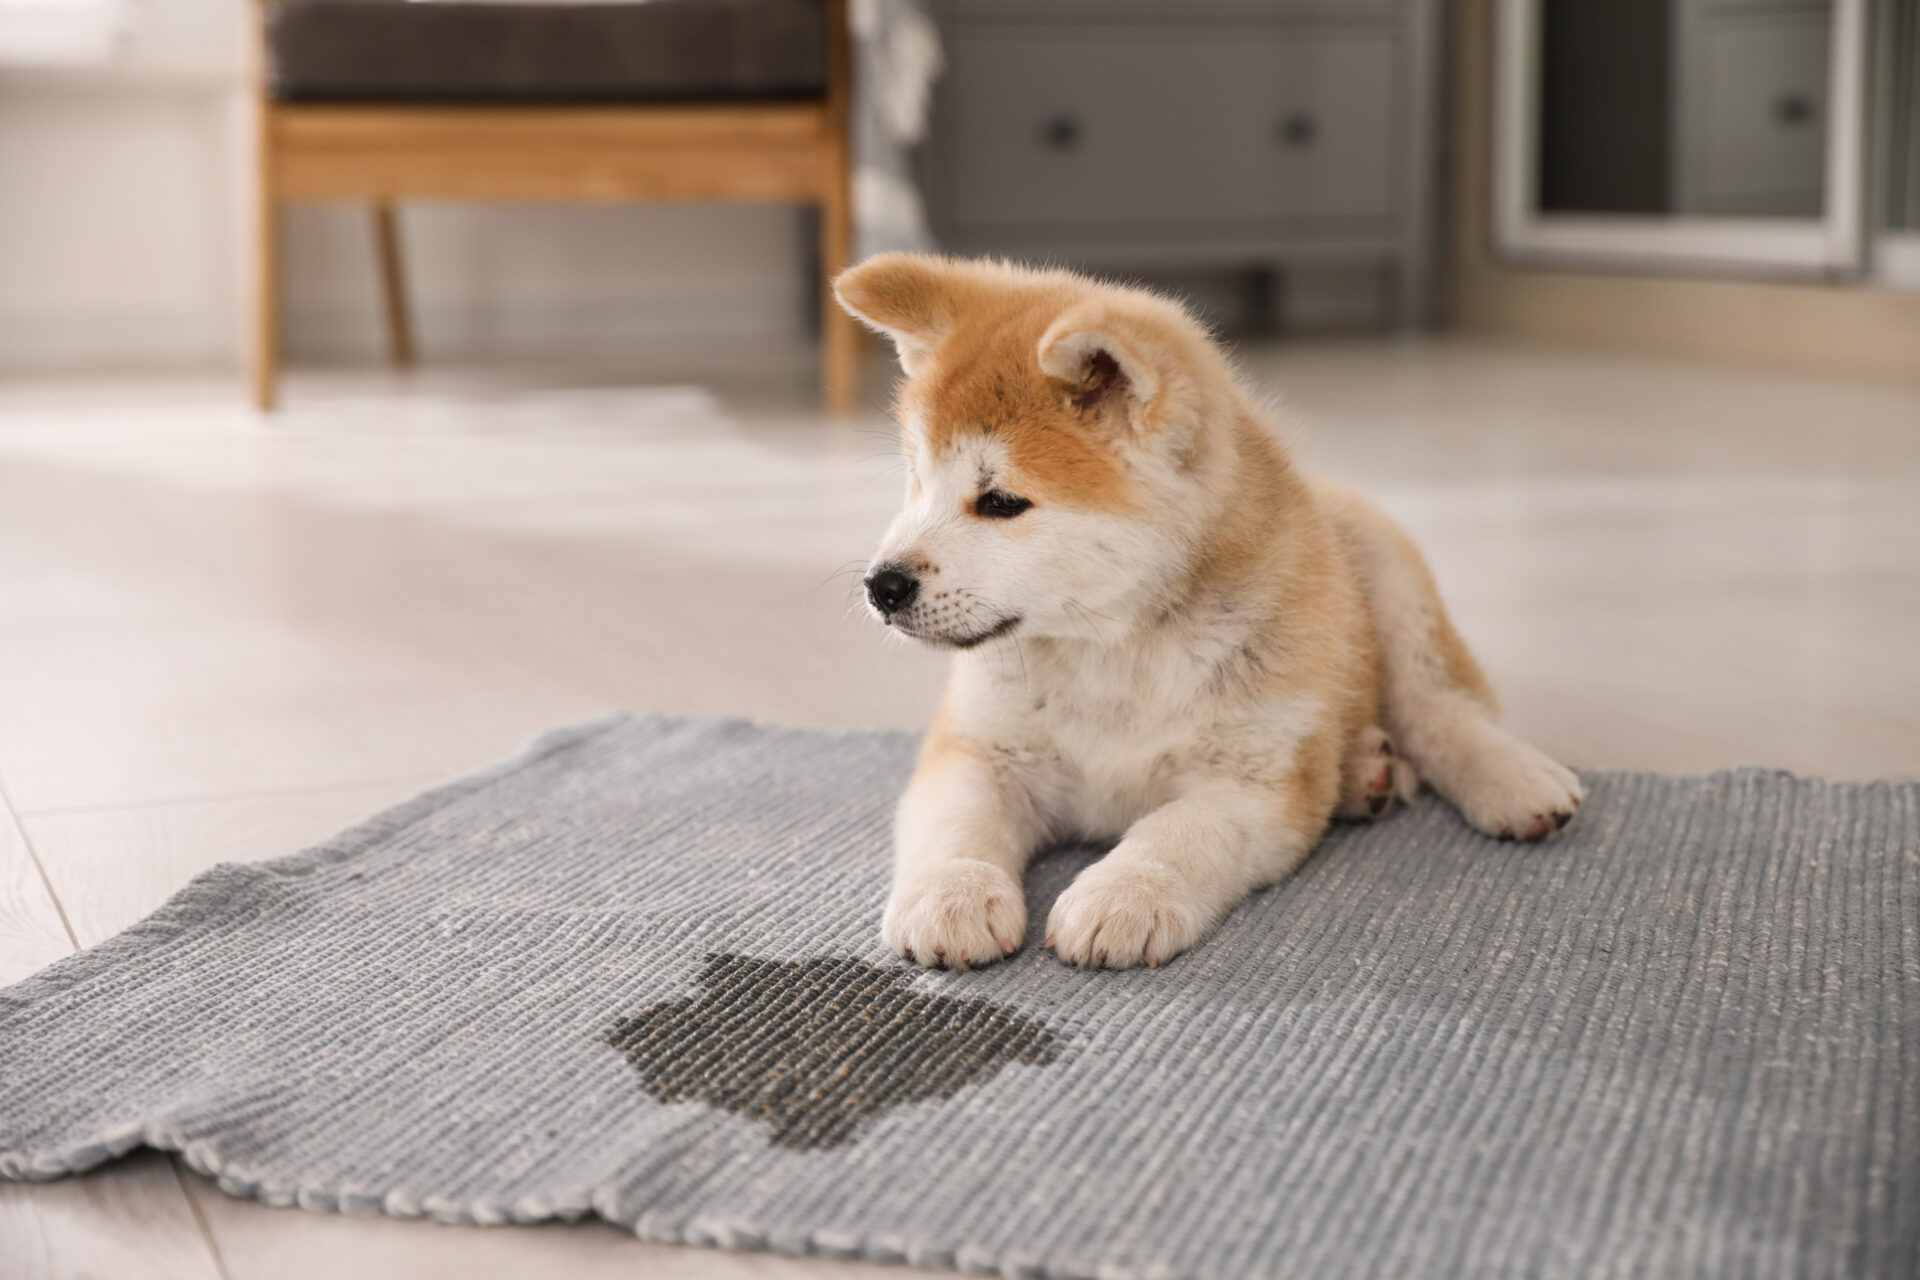 How To Clean Dog Urine From A Jute Rug